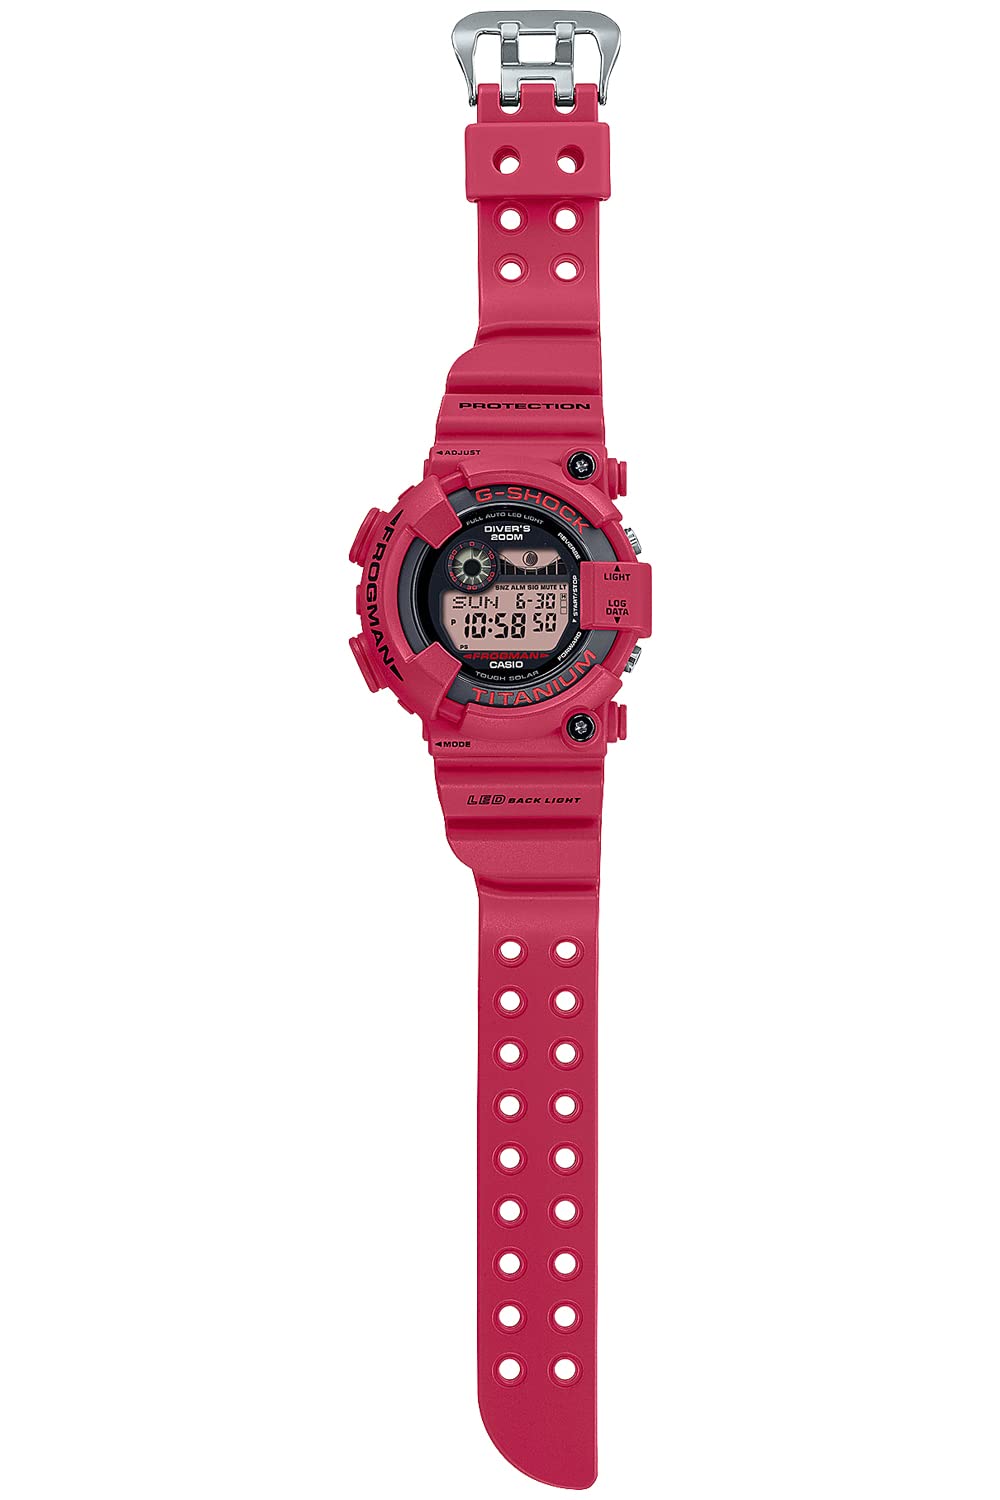 Casio G-Shock GW-8230NT-4JR FROGMAN 30th Limited Edition Solar Watch Red (Japan Domestic Genuine Products)